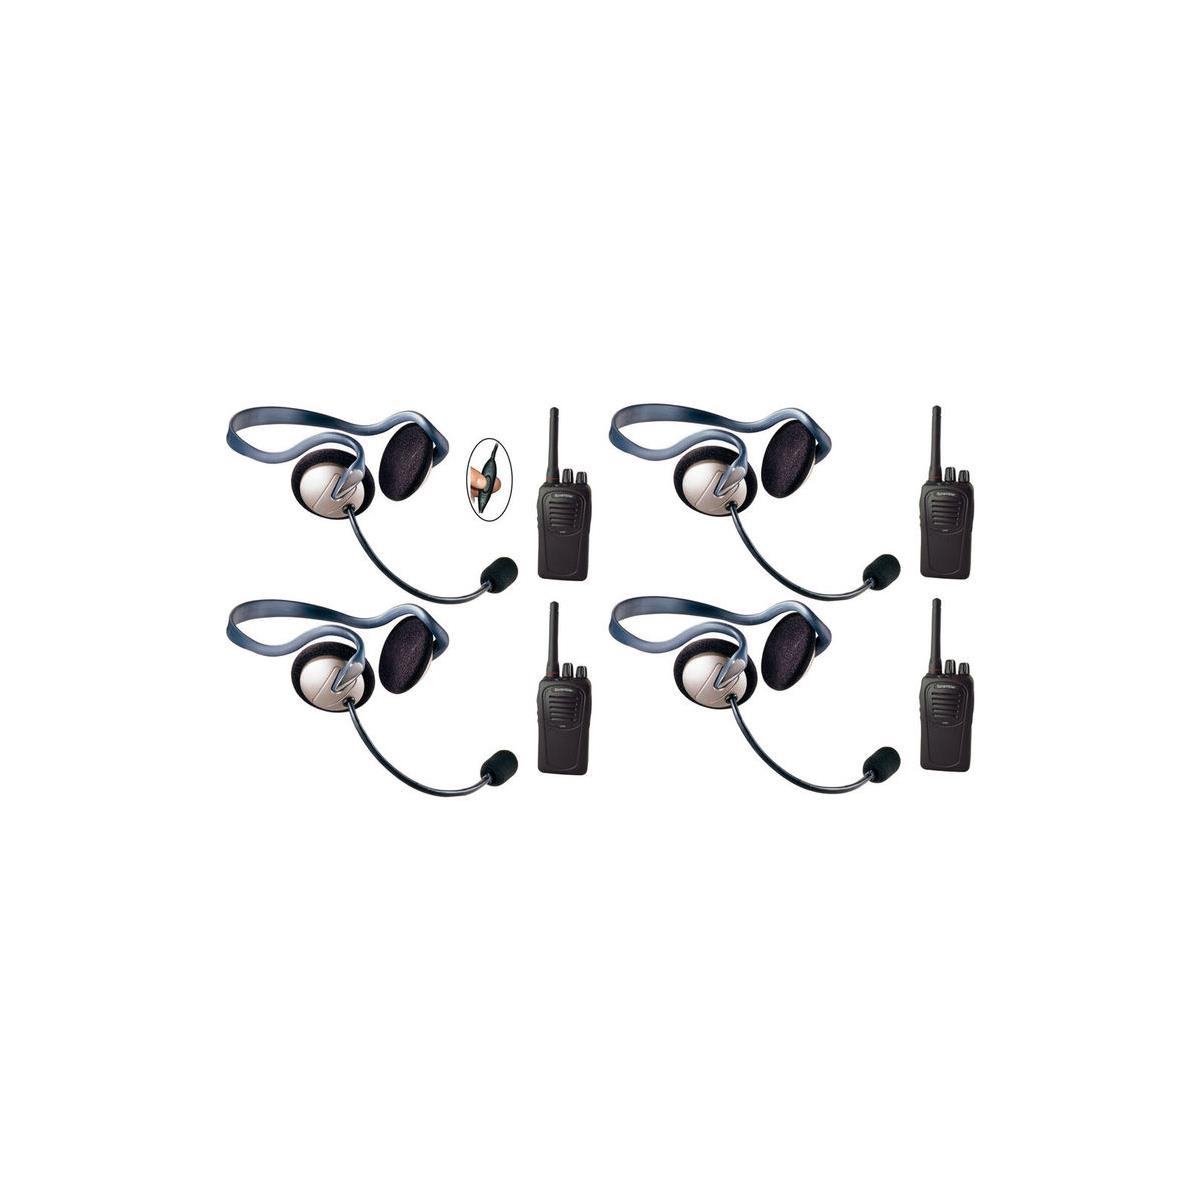 Image of Eartec SC-1000 4-User Two-Way Radio System with 4x Monarch Inline PTT Headsets